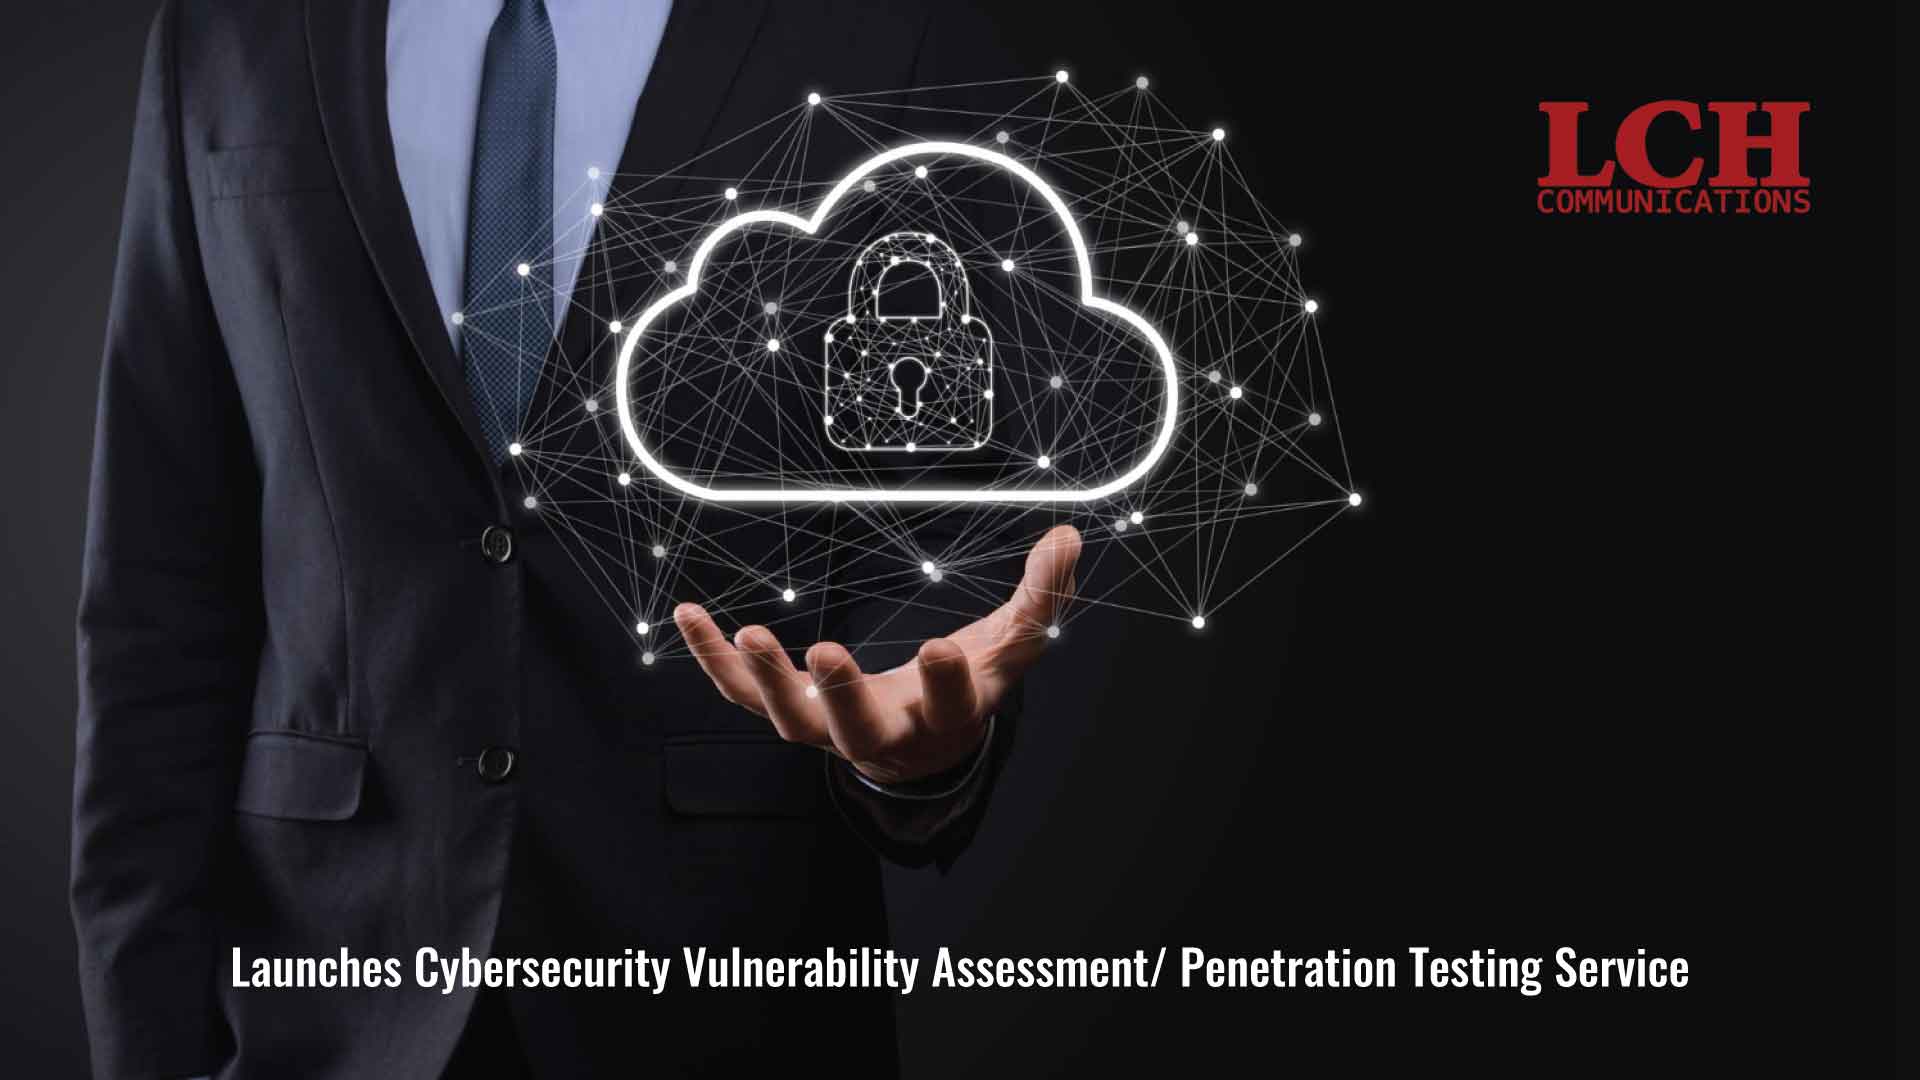 Intelligent CloudCare Launches Cybersecurity Vulnerability Assessment/ Penetration Testing Service